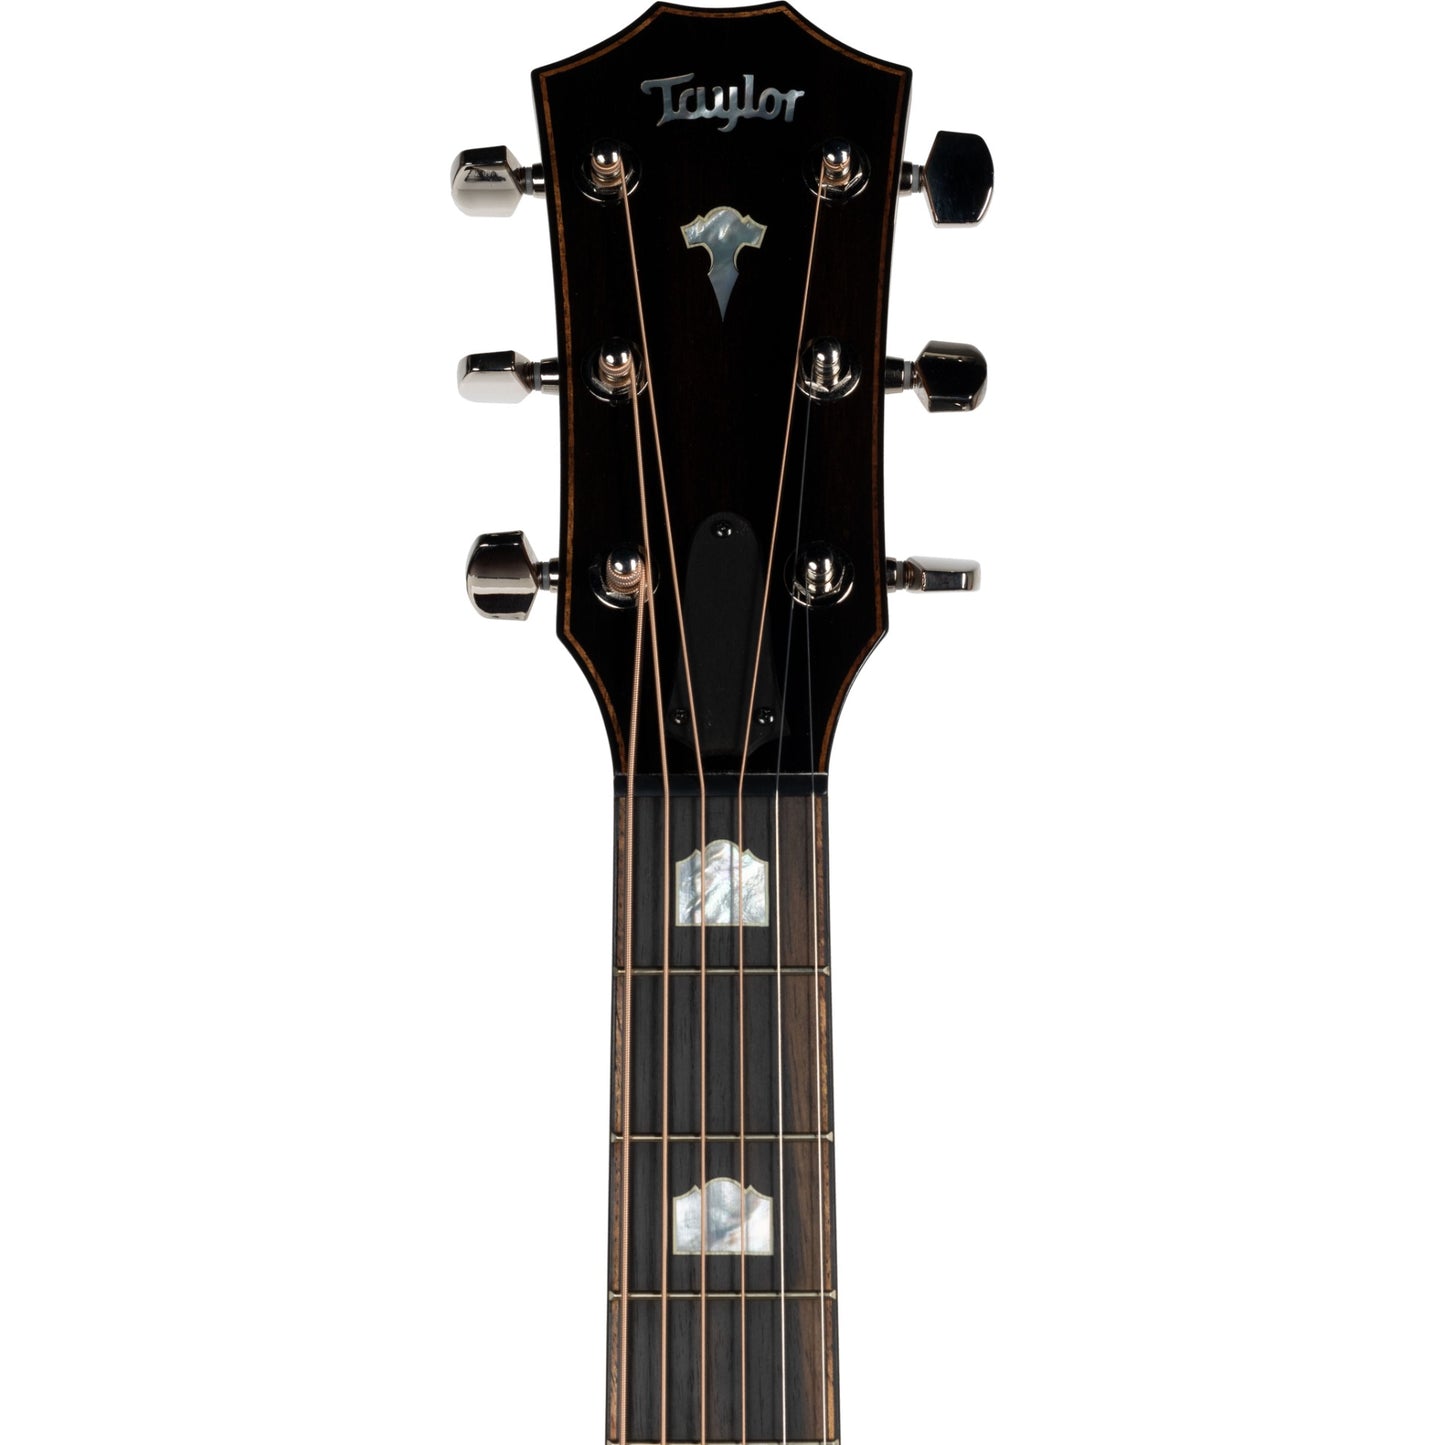 Taylor 818e V-Class Grand Orchestra Acoustic Electric Guitar w/ Case